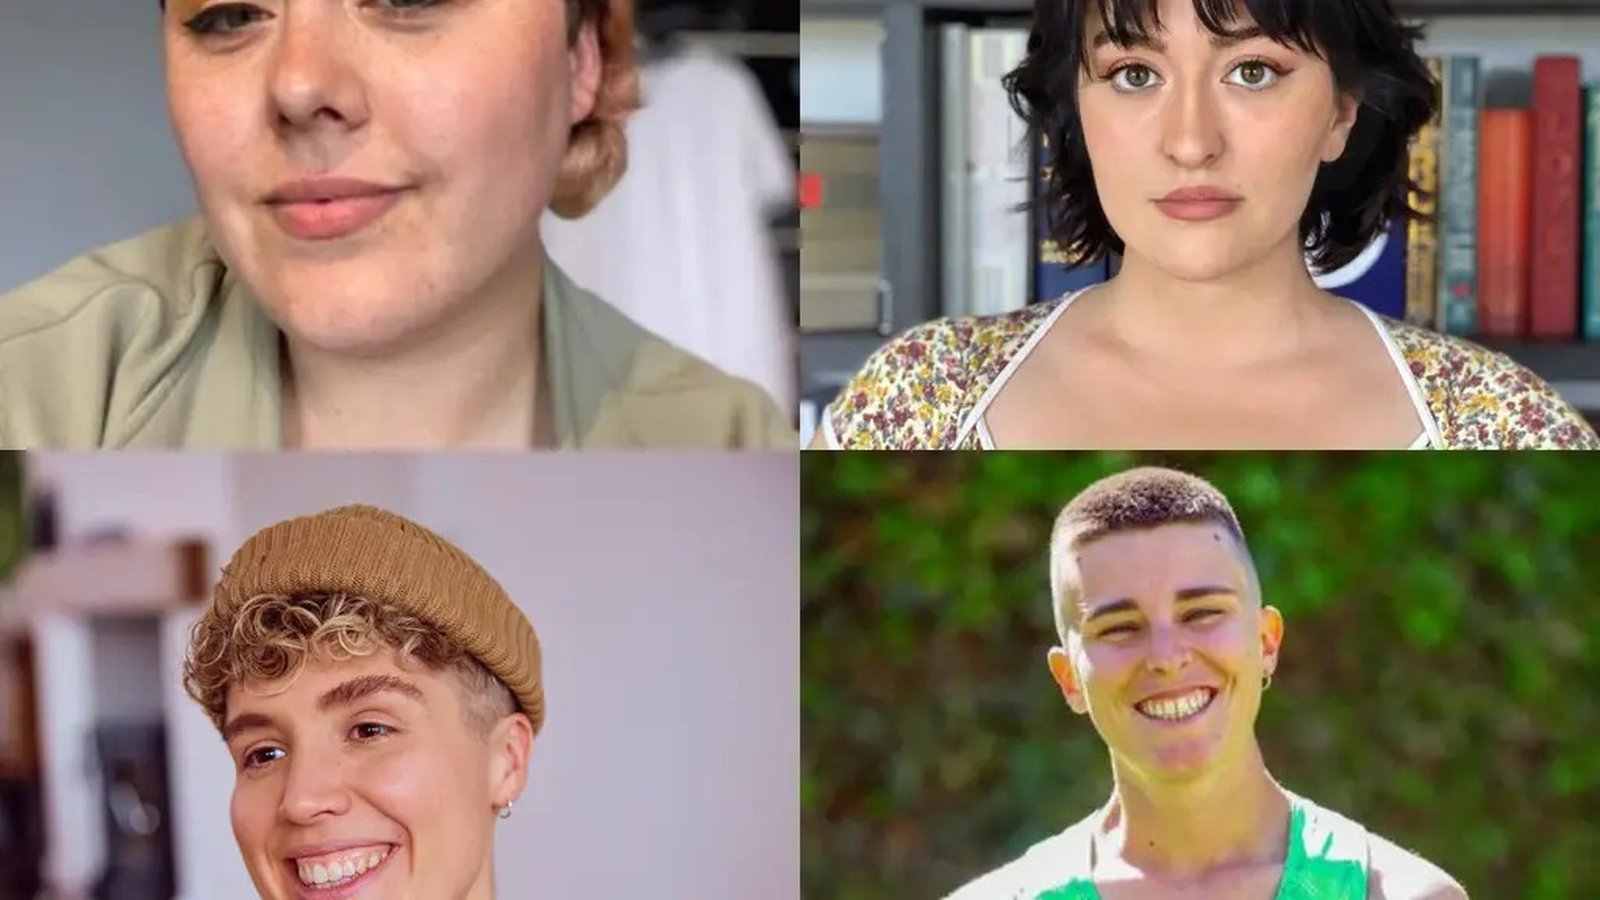 5 Non-Binary People Explain What “Non-Binary” Means To Them 